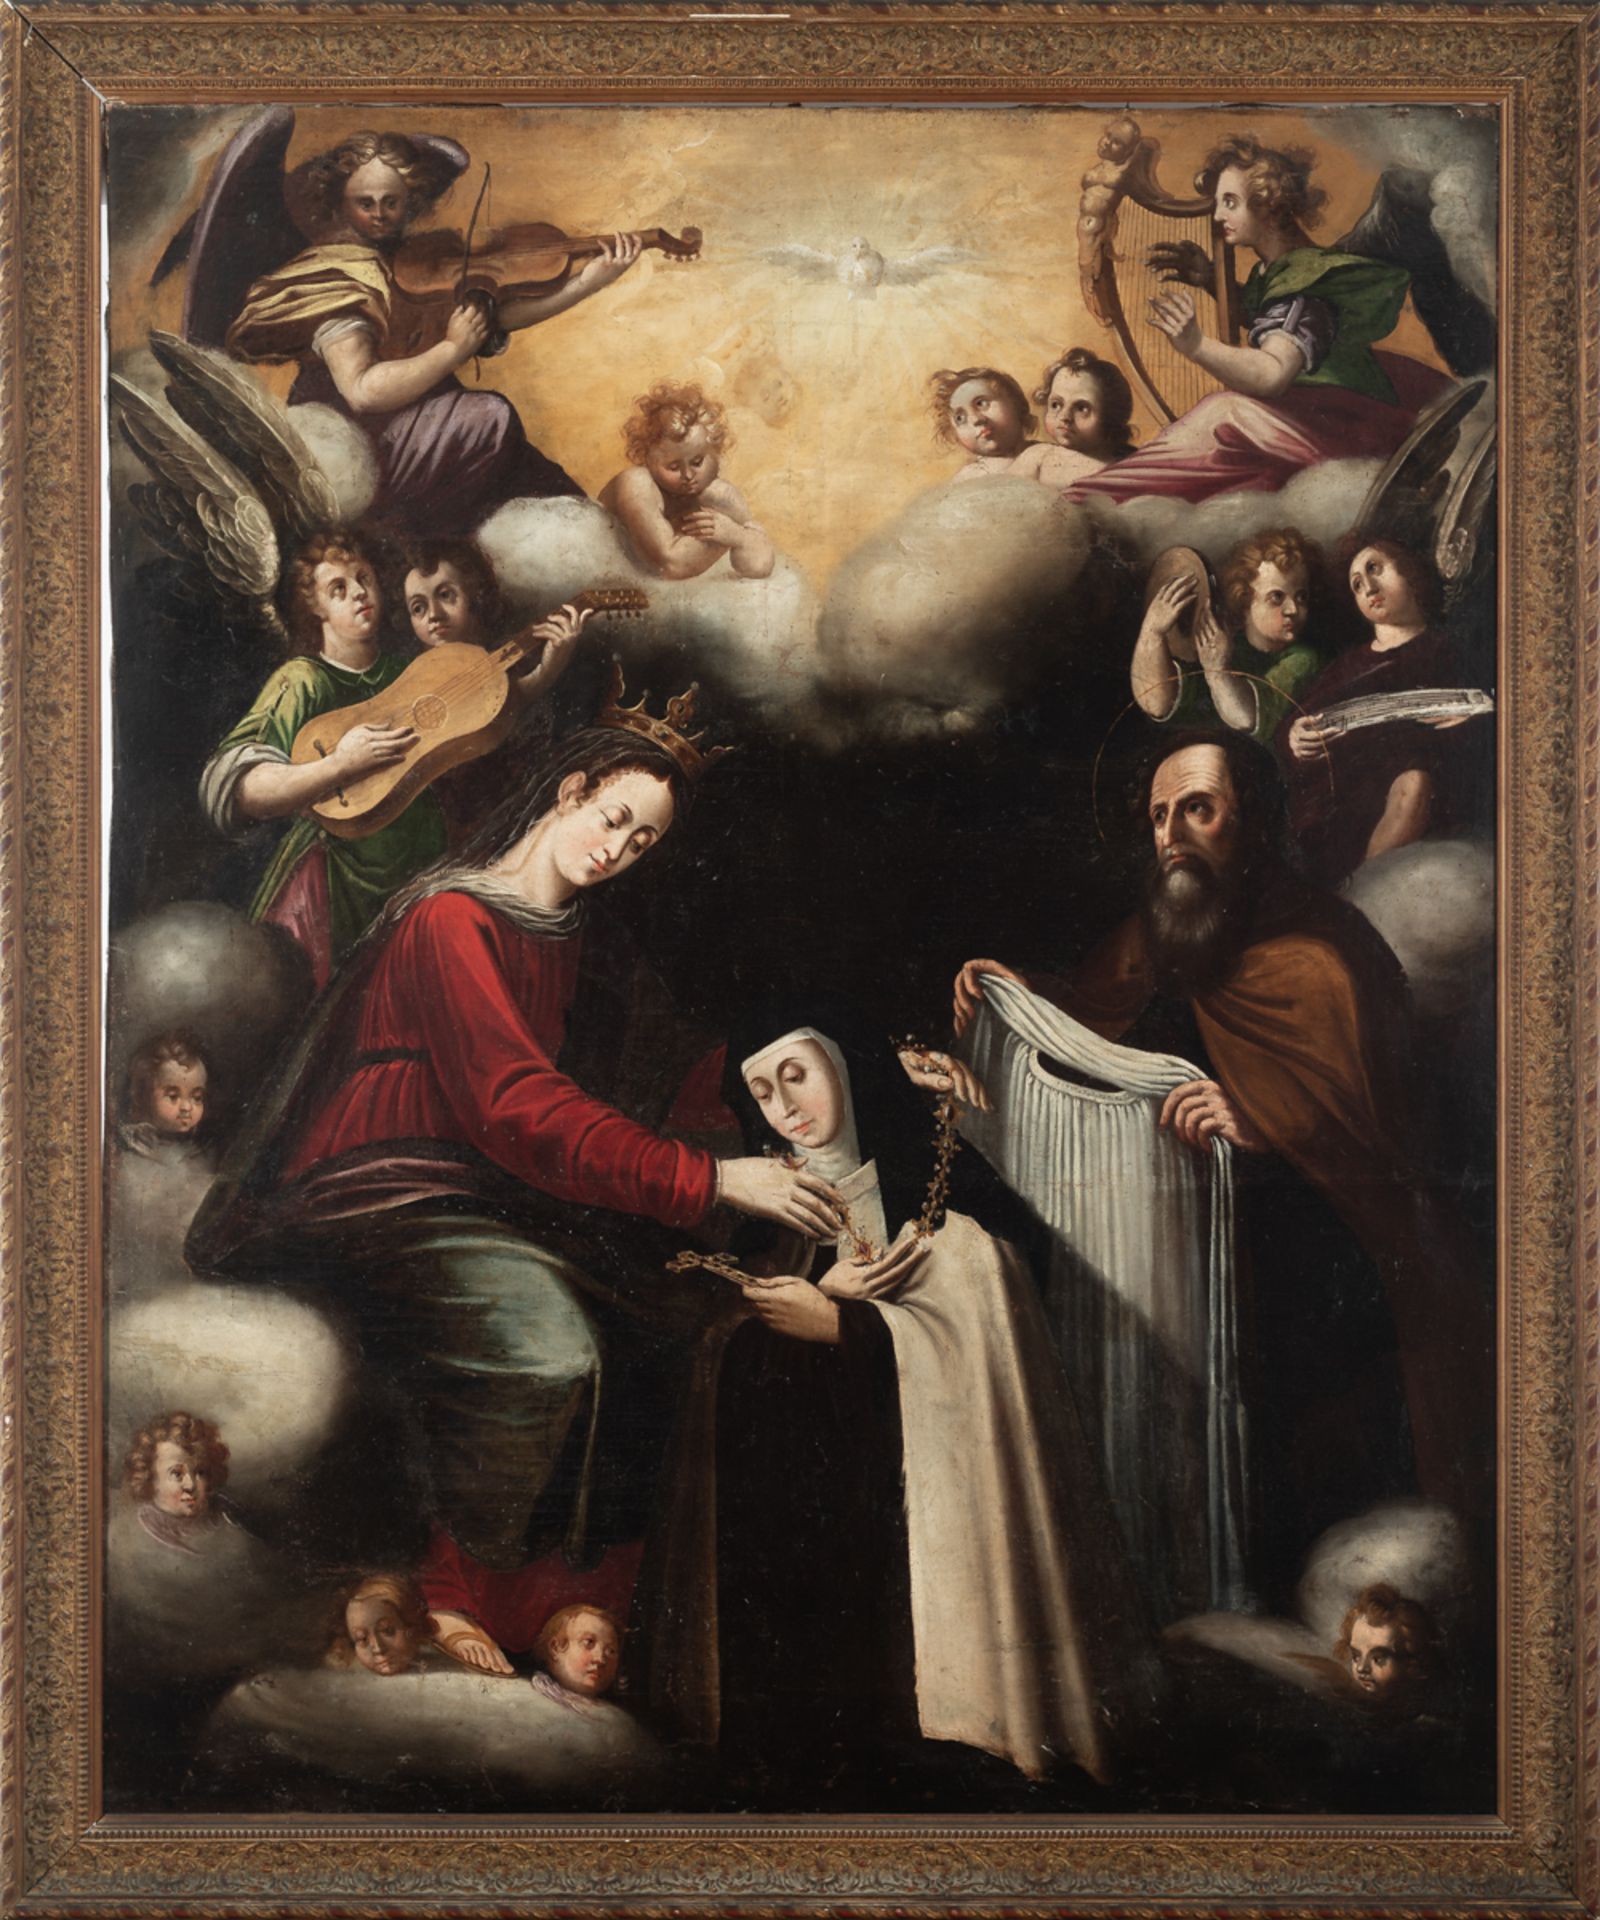 Sevillan school, 17th century. Teresa of Avila Receives the Veil and Necklace from the Virgin and St